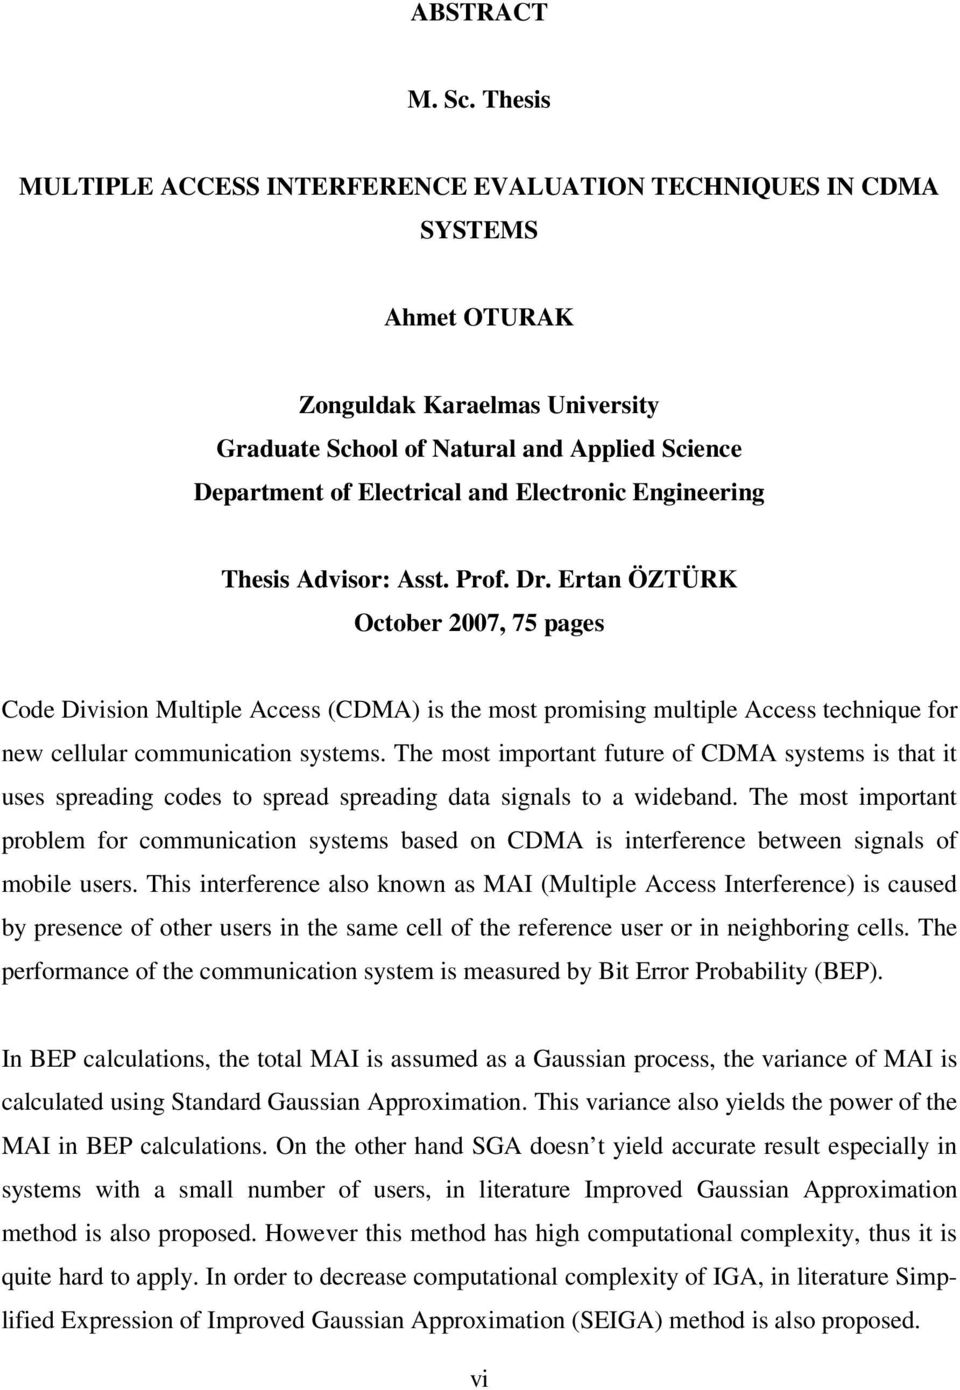 Asst. Prof. Dr. rtan ÖZÜRK Otoer 7, 75 pages Code Division Multiple Aess (CDMA) is the most promising multiple Aess tehnique for new ellular ommuniation systems.